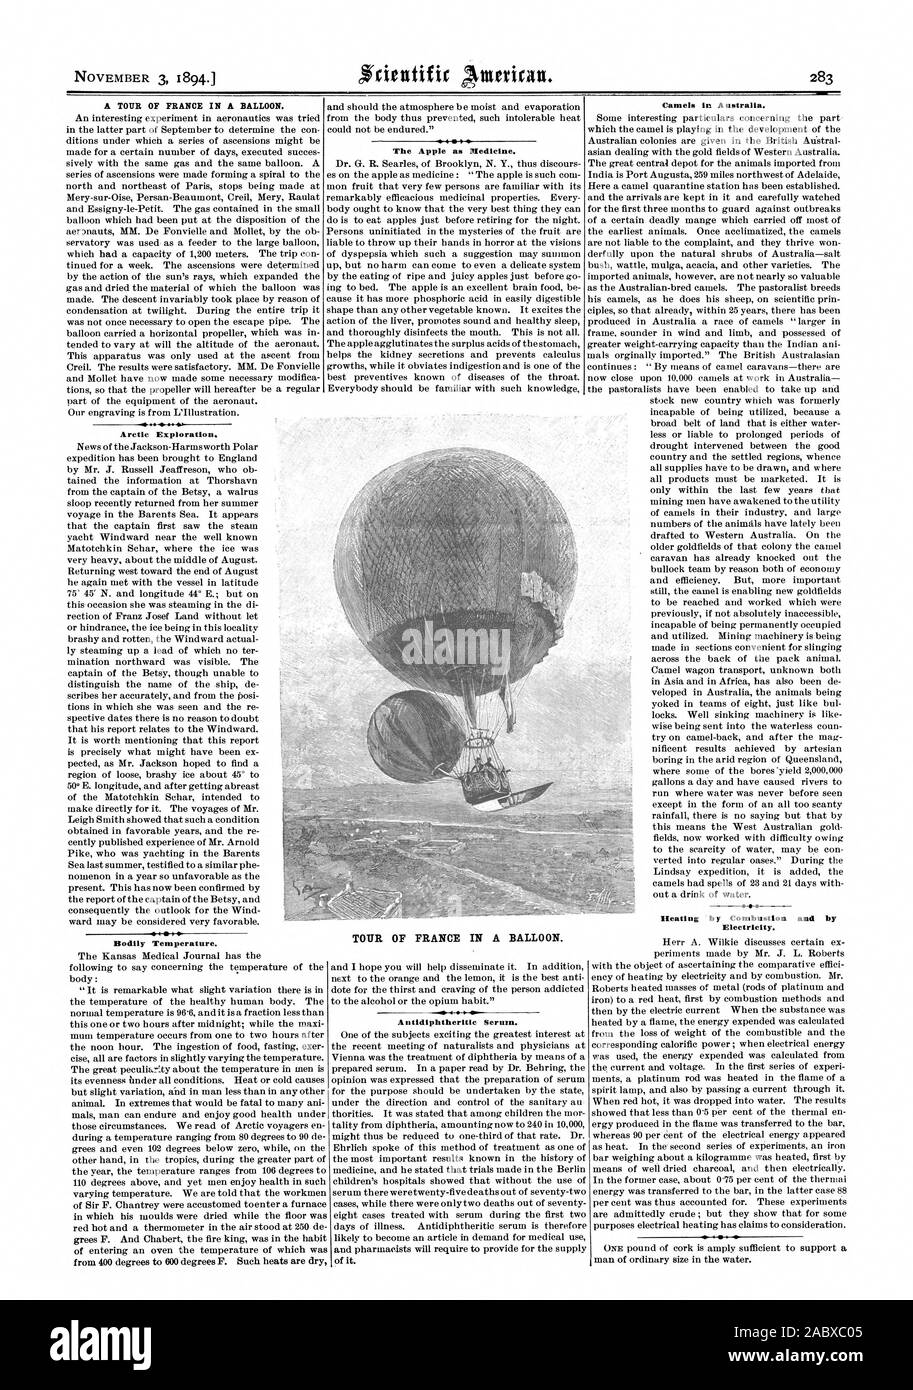 TOUR OF FRANCE IN A BALLOON. The Apple as Medicine. A TOUR OF FRANCE IN A BALLOON. Arctic Exploration. Bodily Temperature. Camels in Australia. Heating by Combustion and by Electricity. A ntidiphtheritIc Serum., scientific american, 1894-11-03 Stock Photo